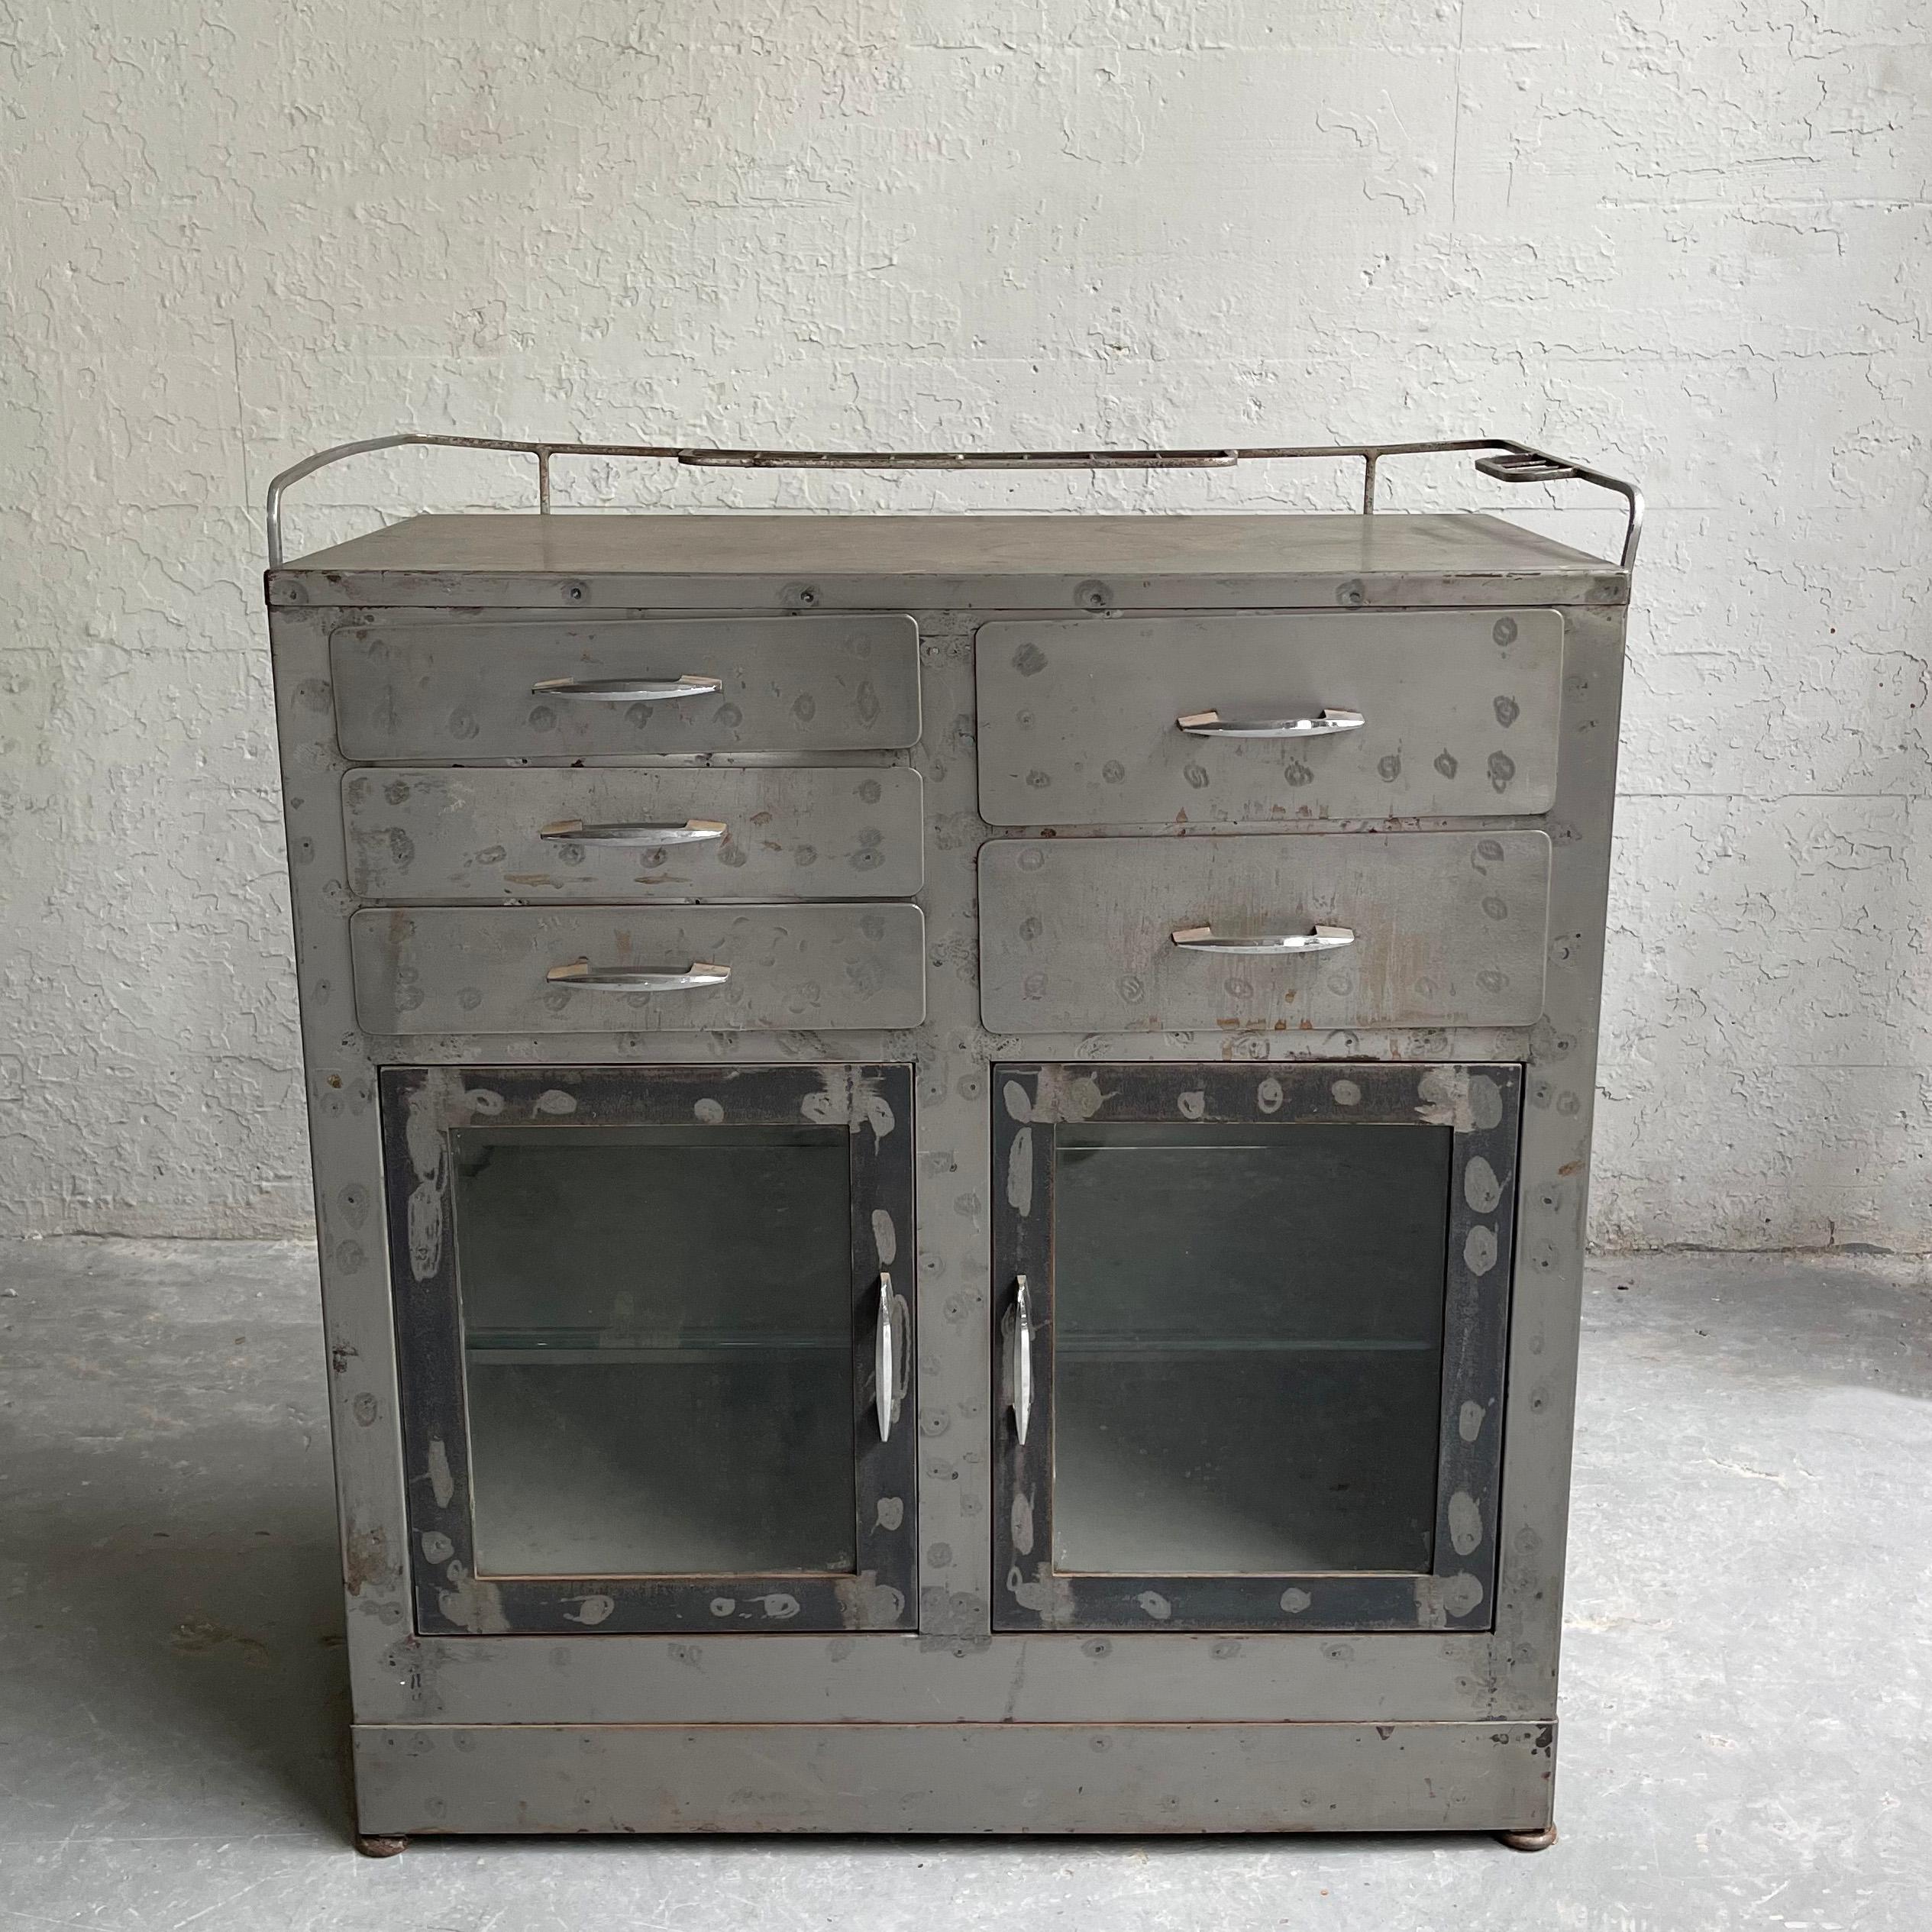 Early 20th century, industrial, brushed steel, apothecary cabinet, nurse station features top drawers, glass front bottom doors with glass interior shelves and an upper rack for bottles. Perfect as an industrial entryway piece or bar cabinet. The